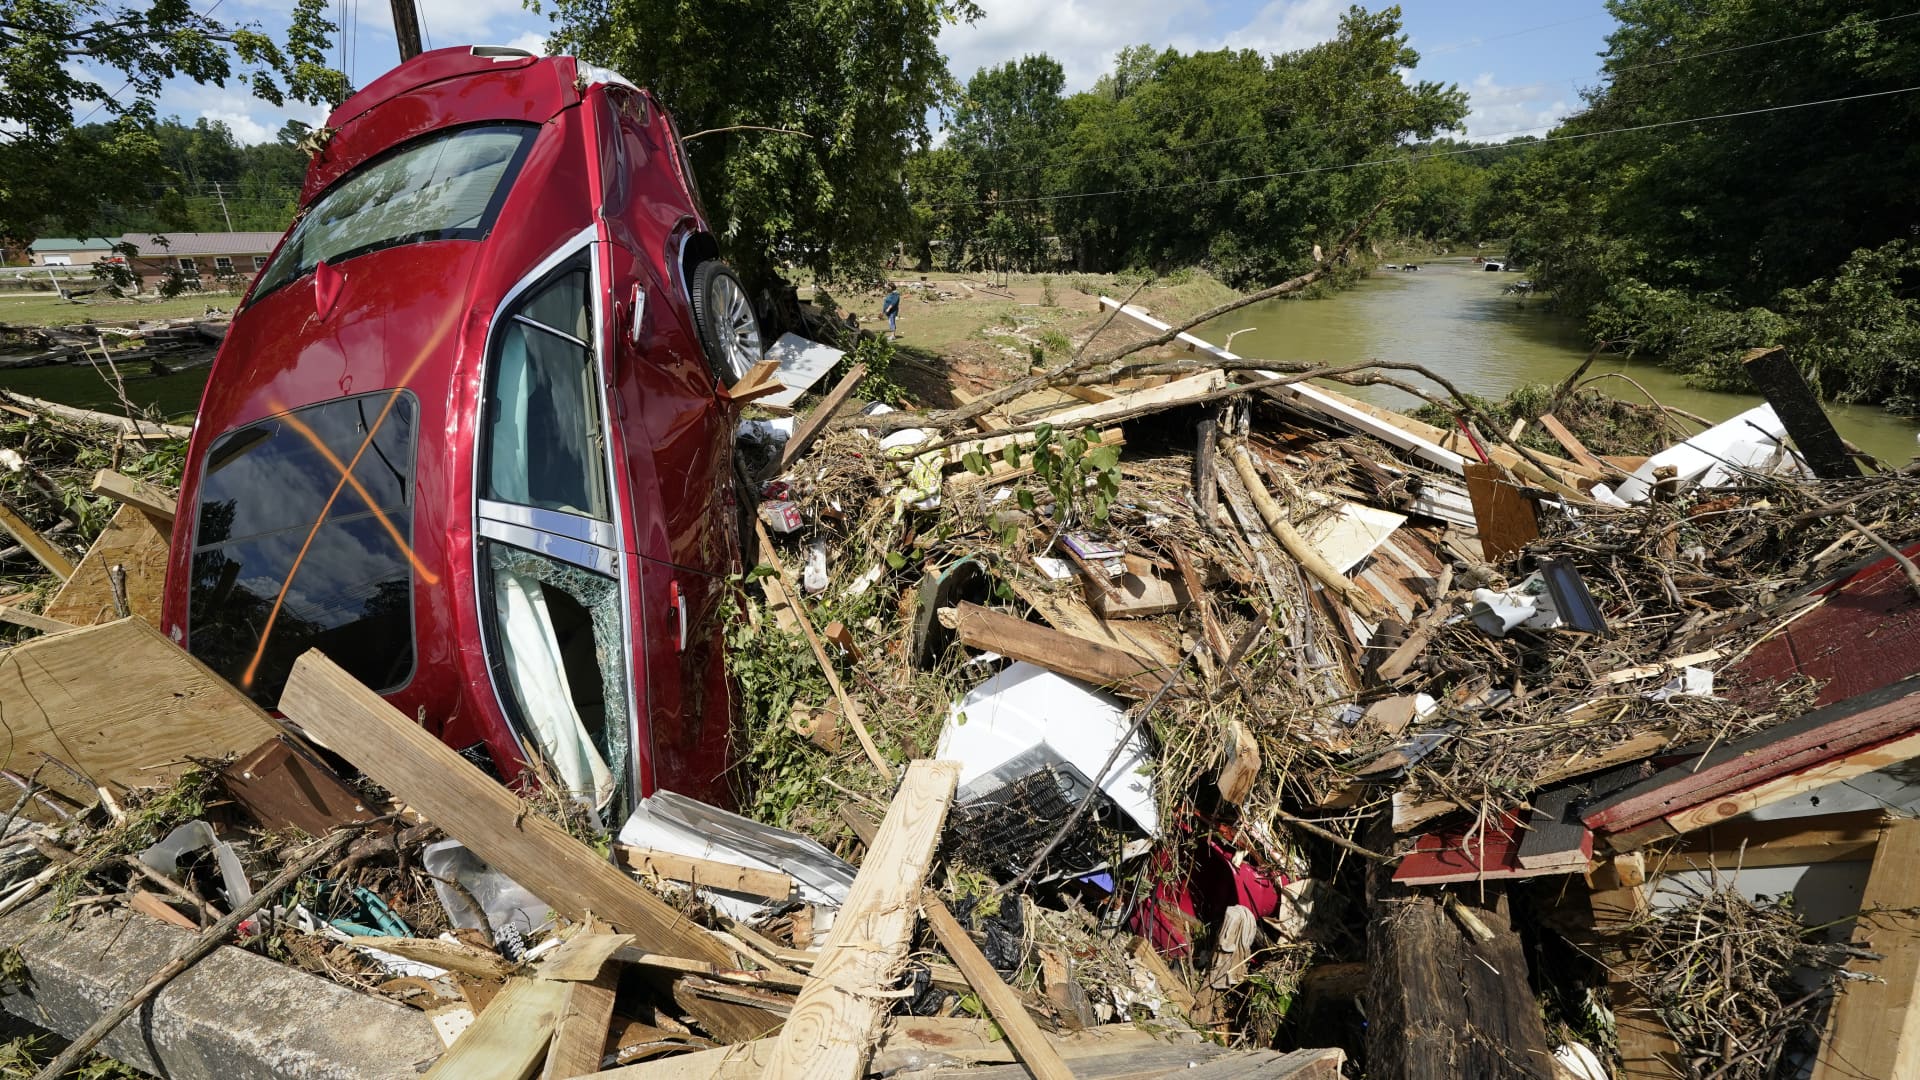 A car is among debris that washed up against a bridge over a stream Sunday, Aug. 22, 2021, in Waverly, Tenn.